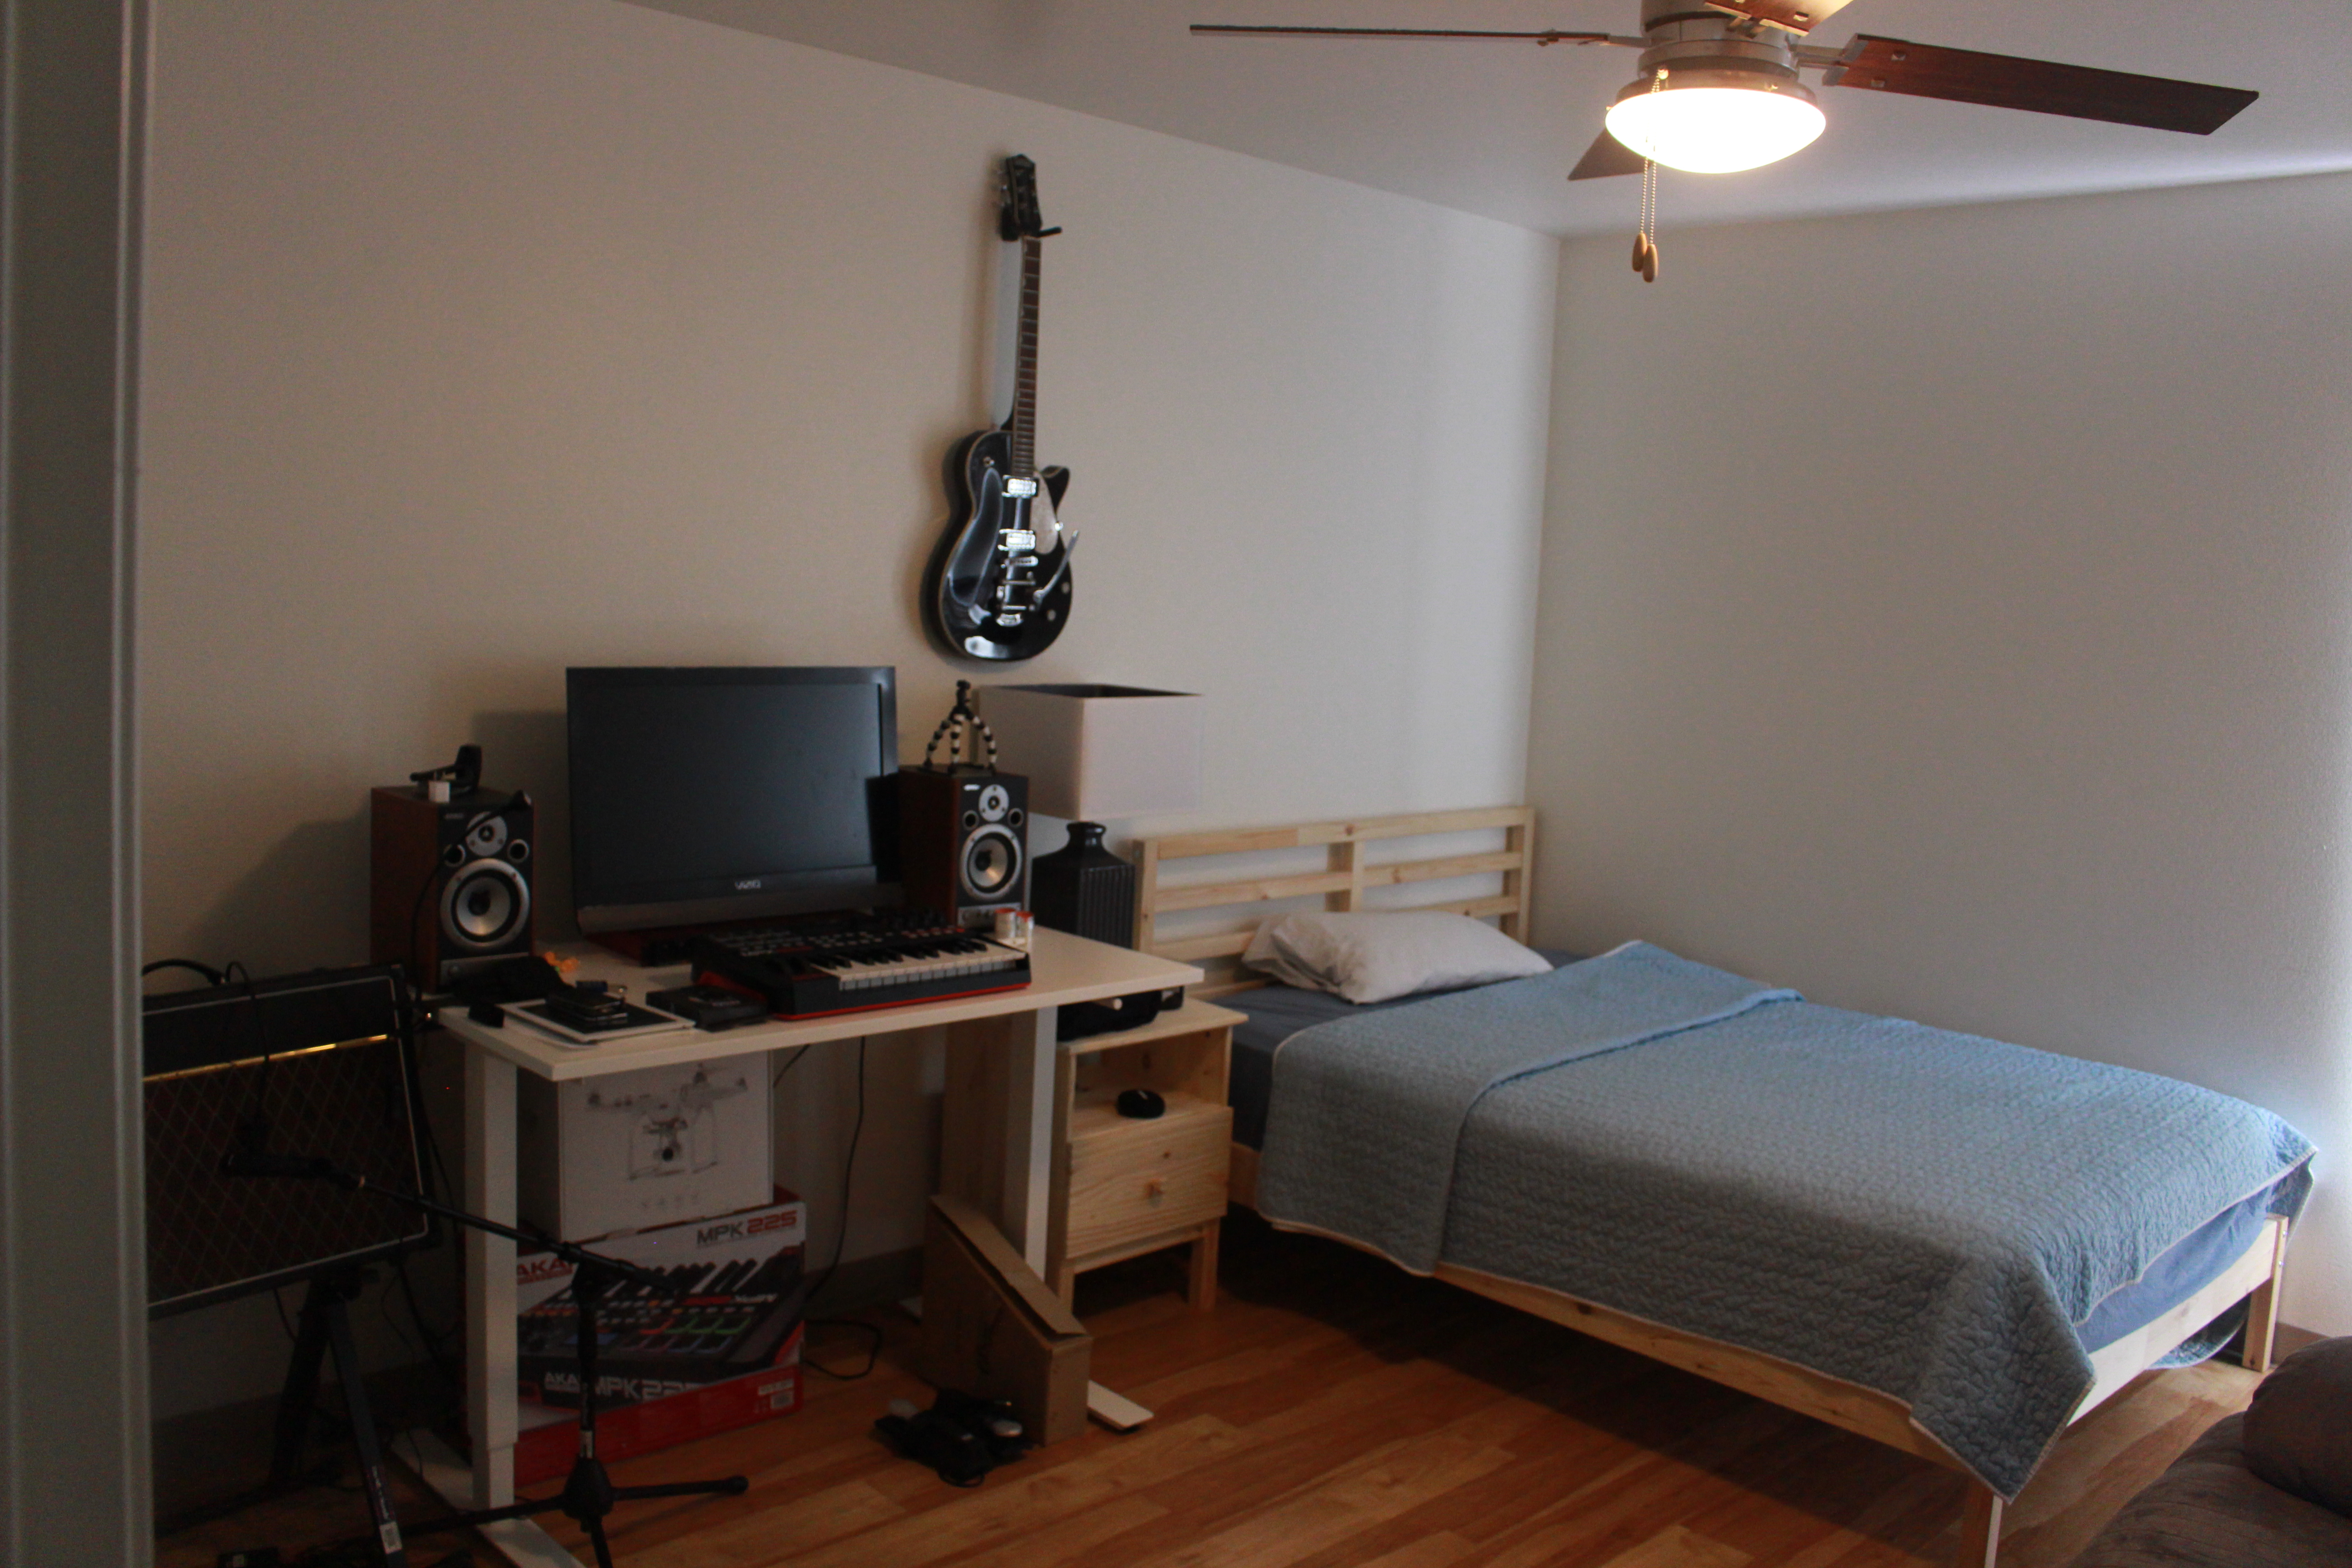 Beige wall room, laminate wood floors, a desk with a computer, a guitar and speakers and other music boxes, a modern black and white lamp on a natural wood bedside table, natural wood twin bed with a light blue comforter, white pillow, a ceiling fan with